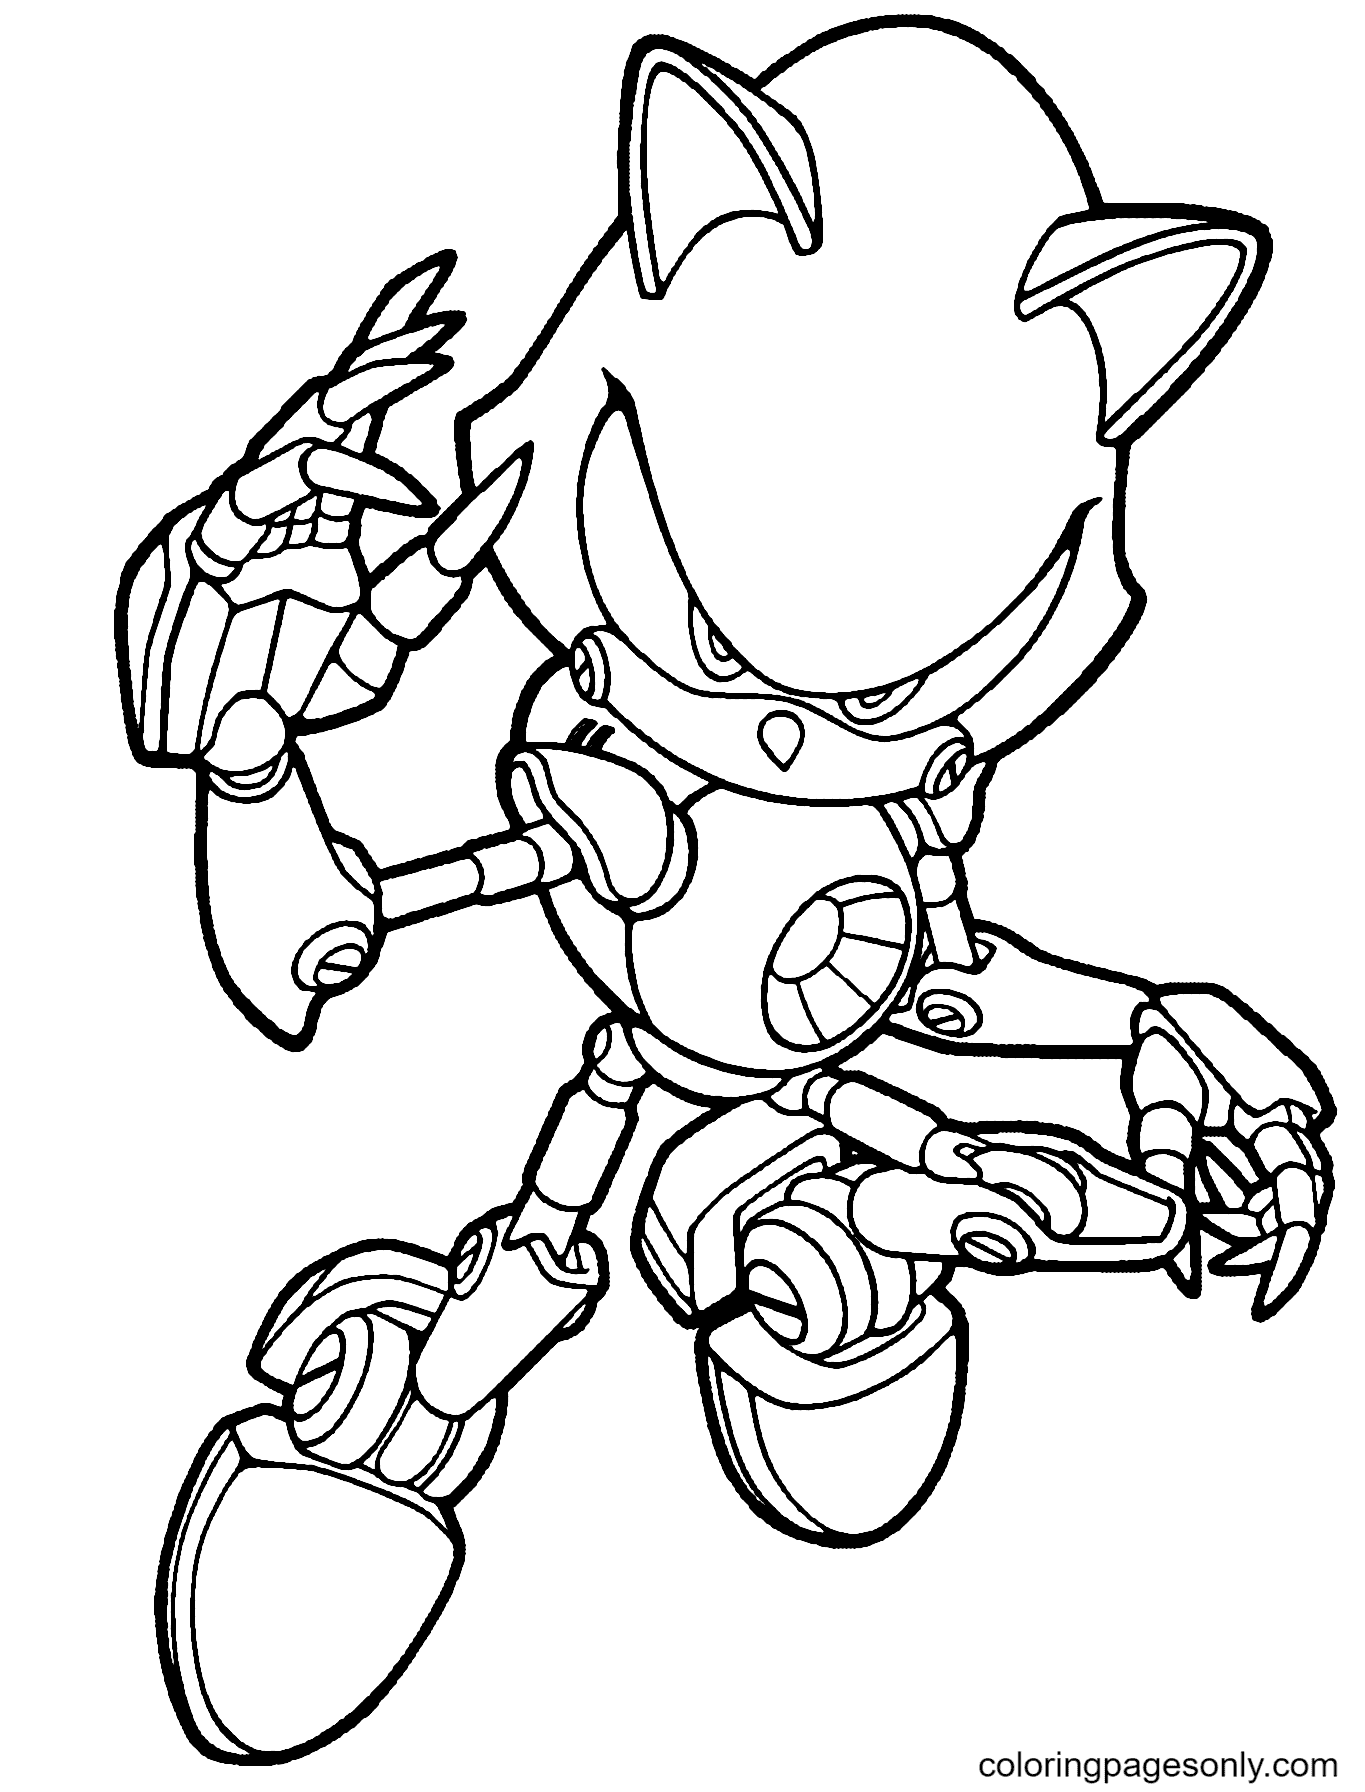 Metal Sonic Coloring Page